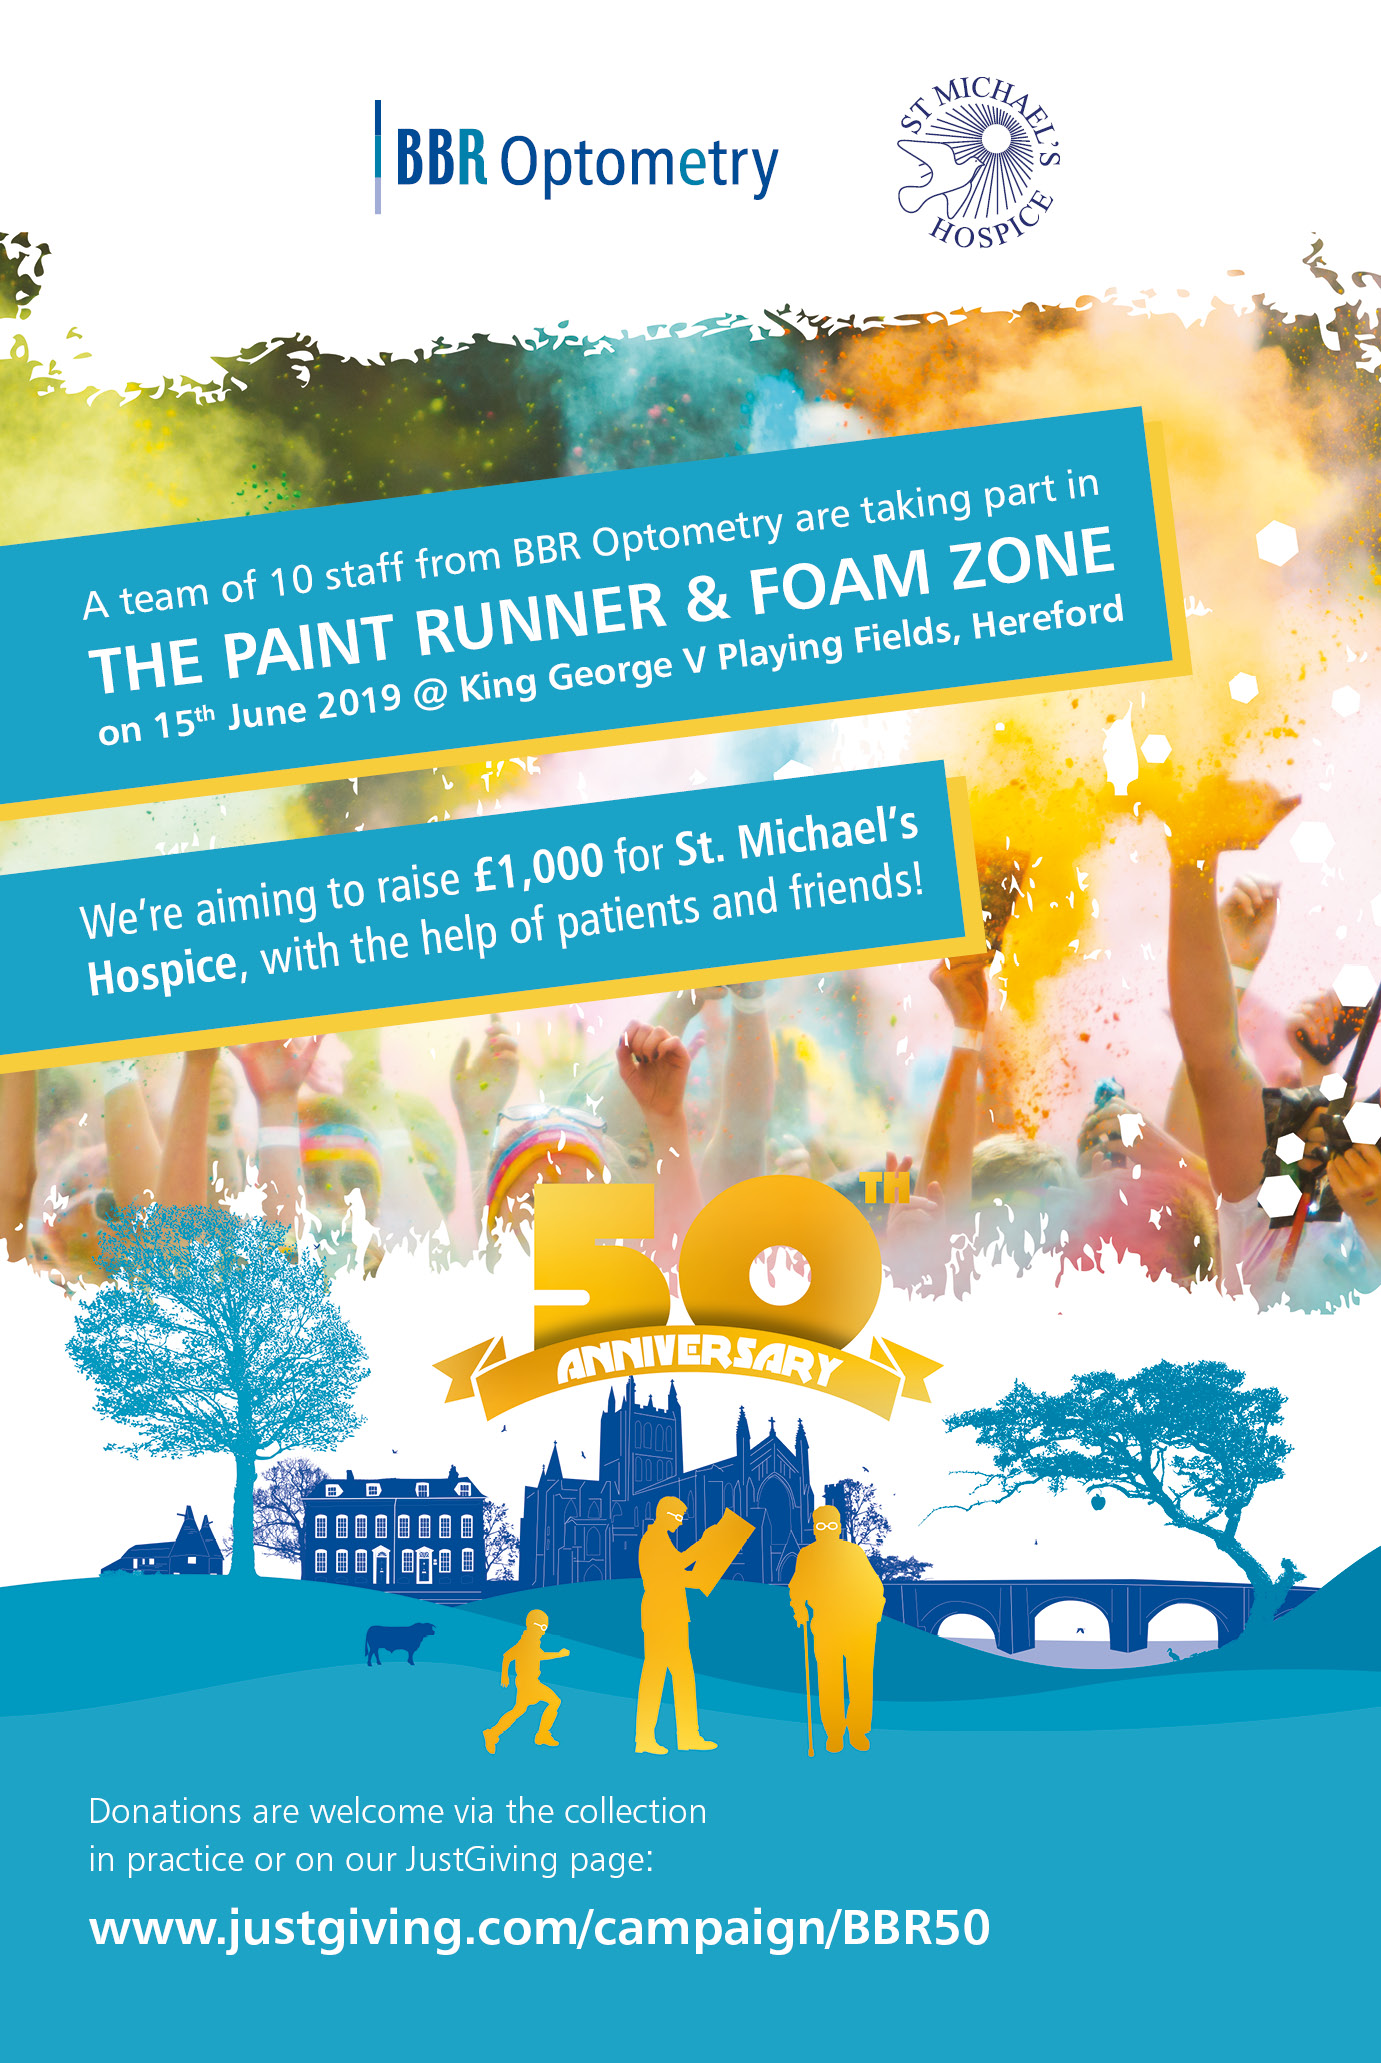 BBR Optometry to take on the Paint Runner in aid of St Michael’s Hospice